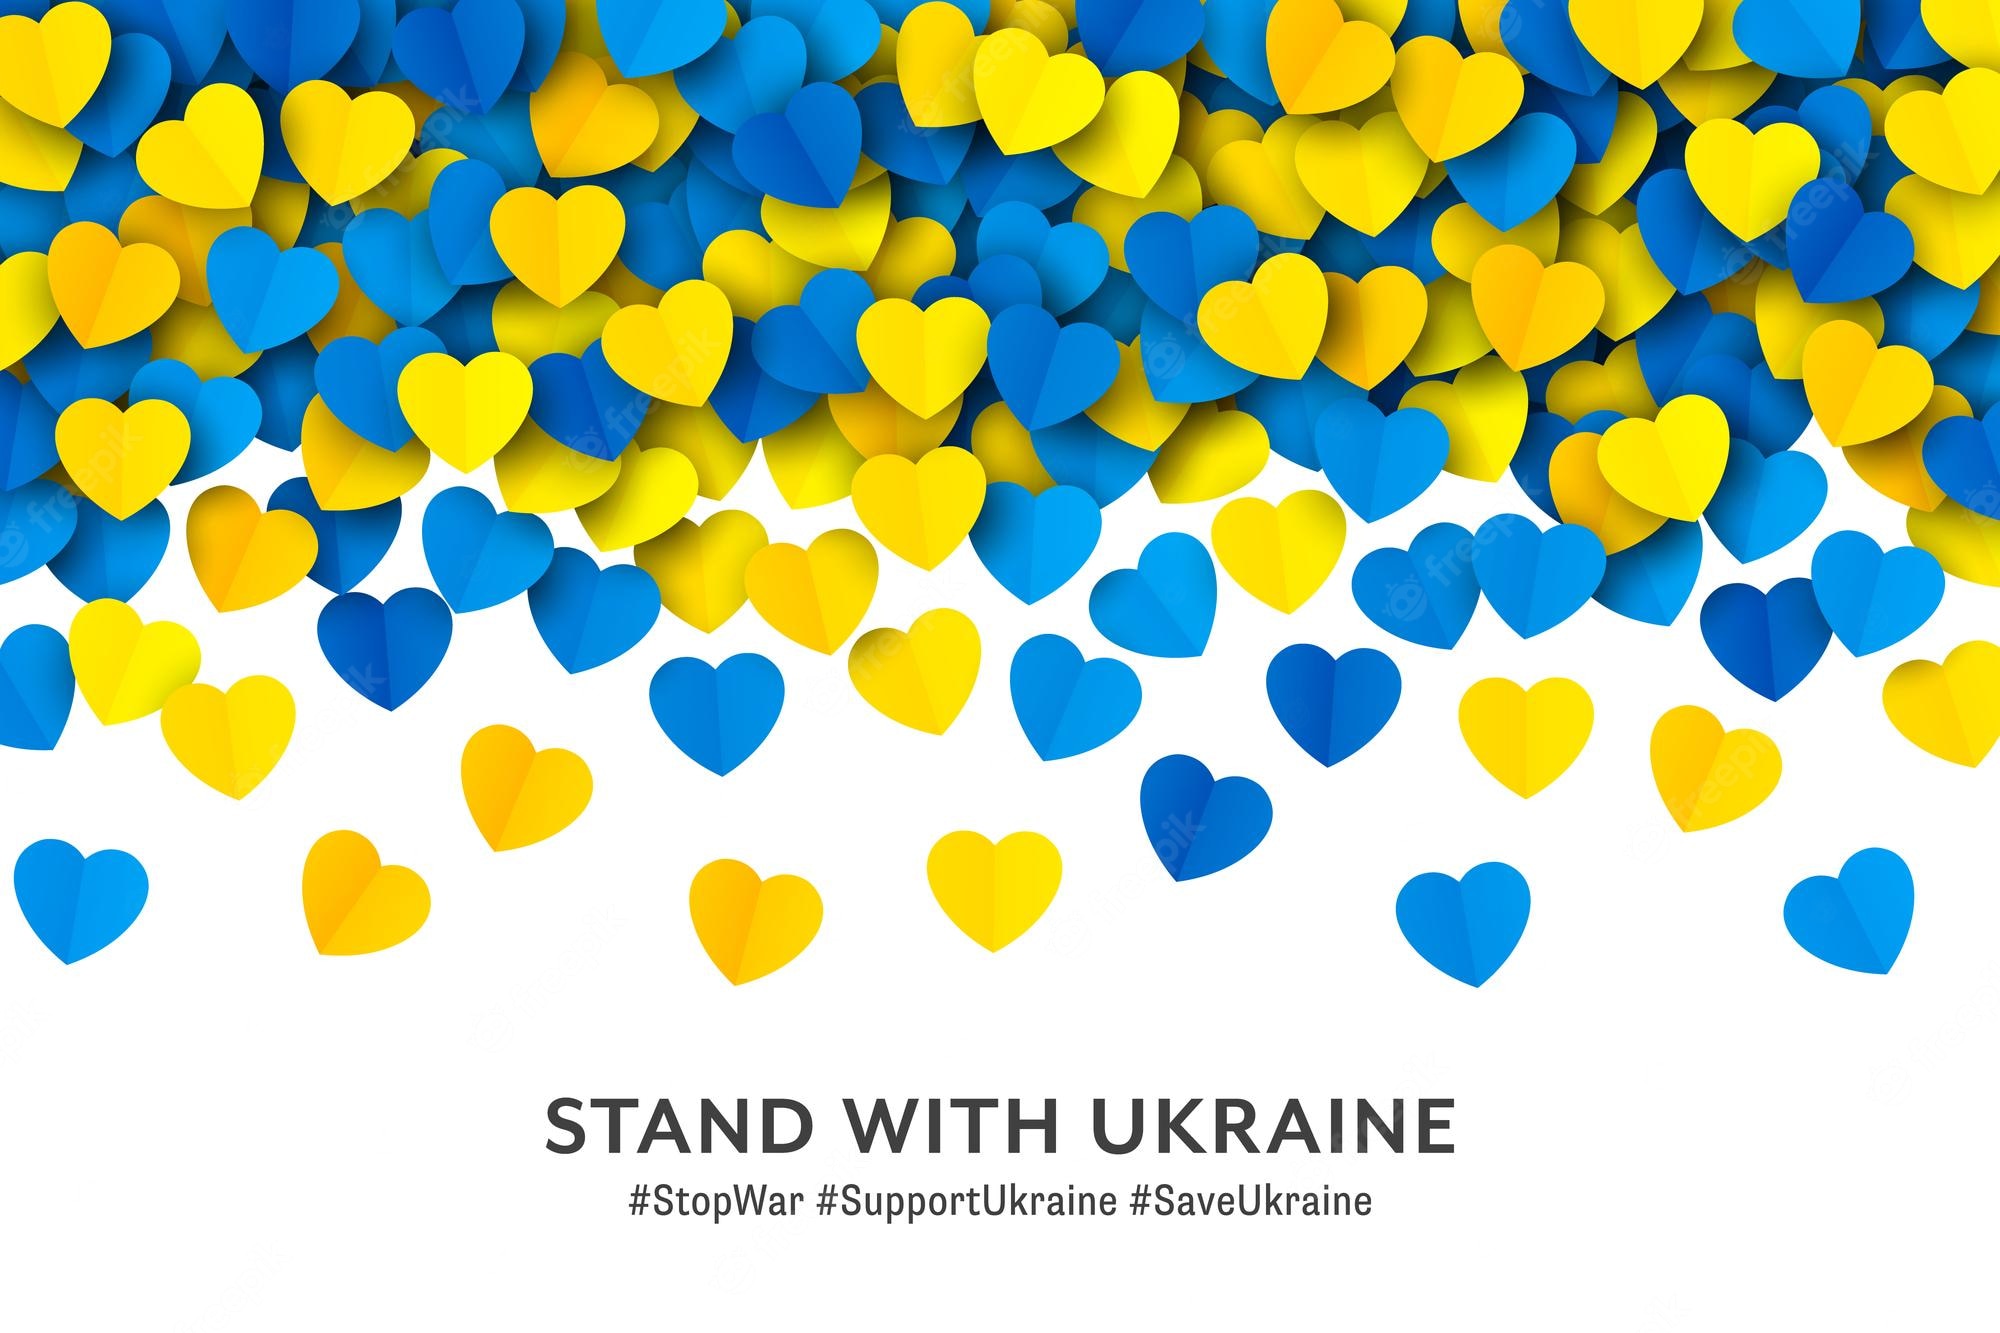 Premium Vector. Stand with ukraine vector falling yellow blue paper hearts border isolated on white background pray and stay solidarity with ukraine vector wallpaper ukrainian national flag colours abstract artwork